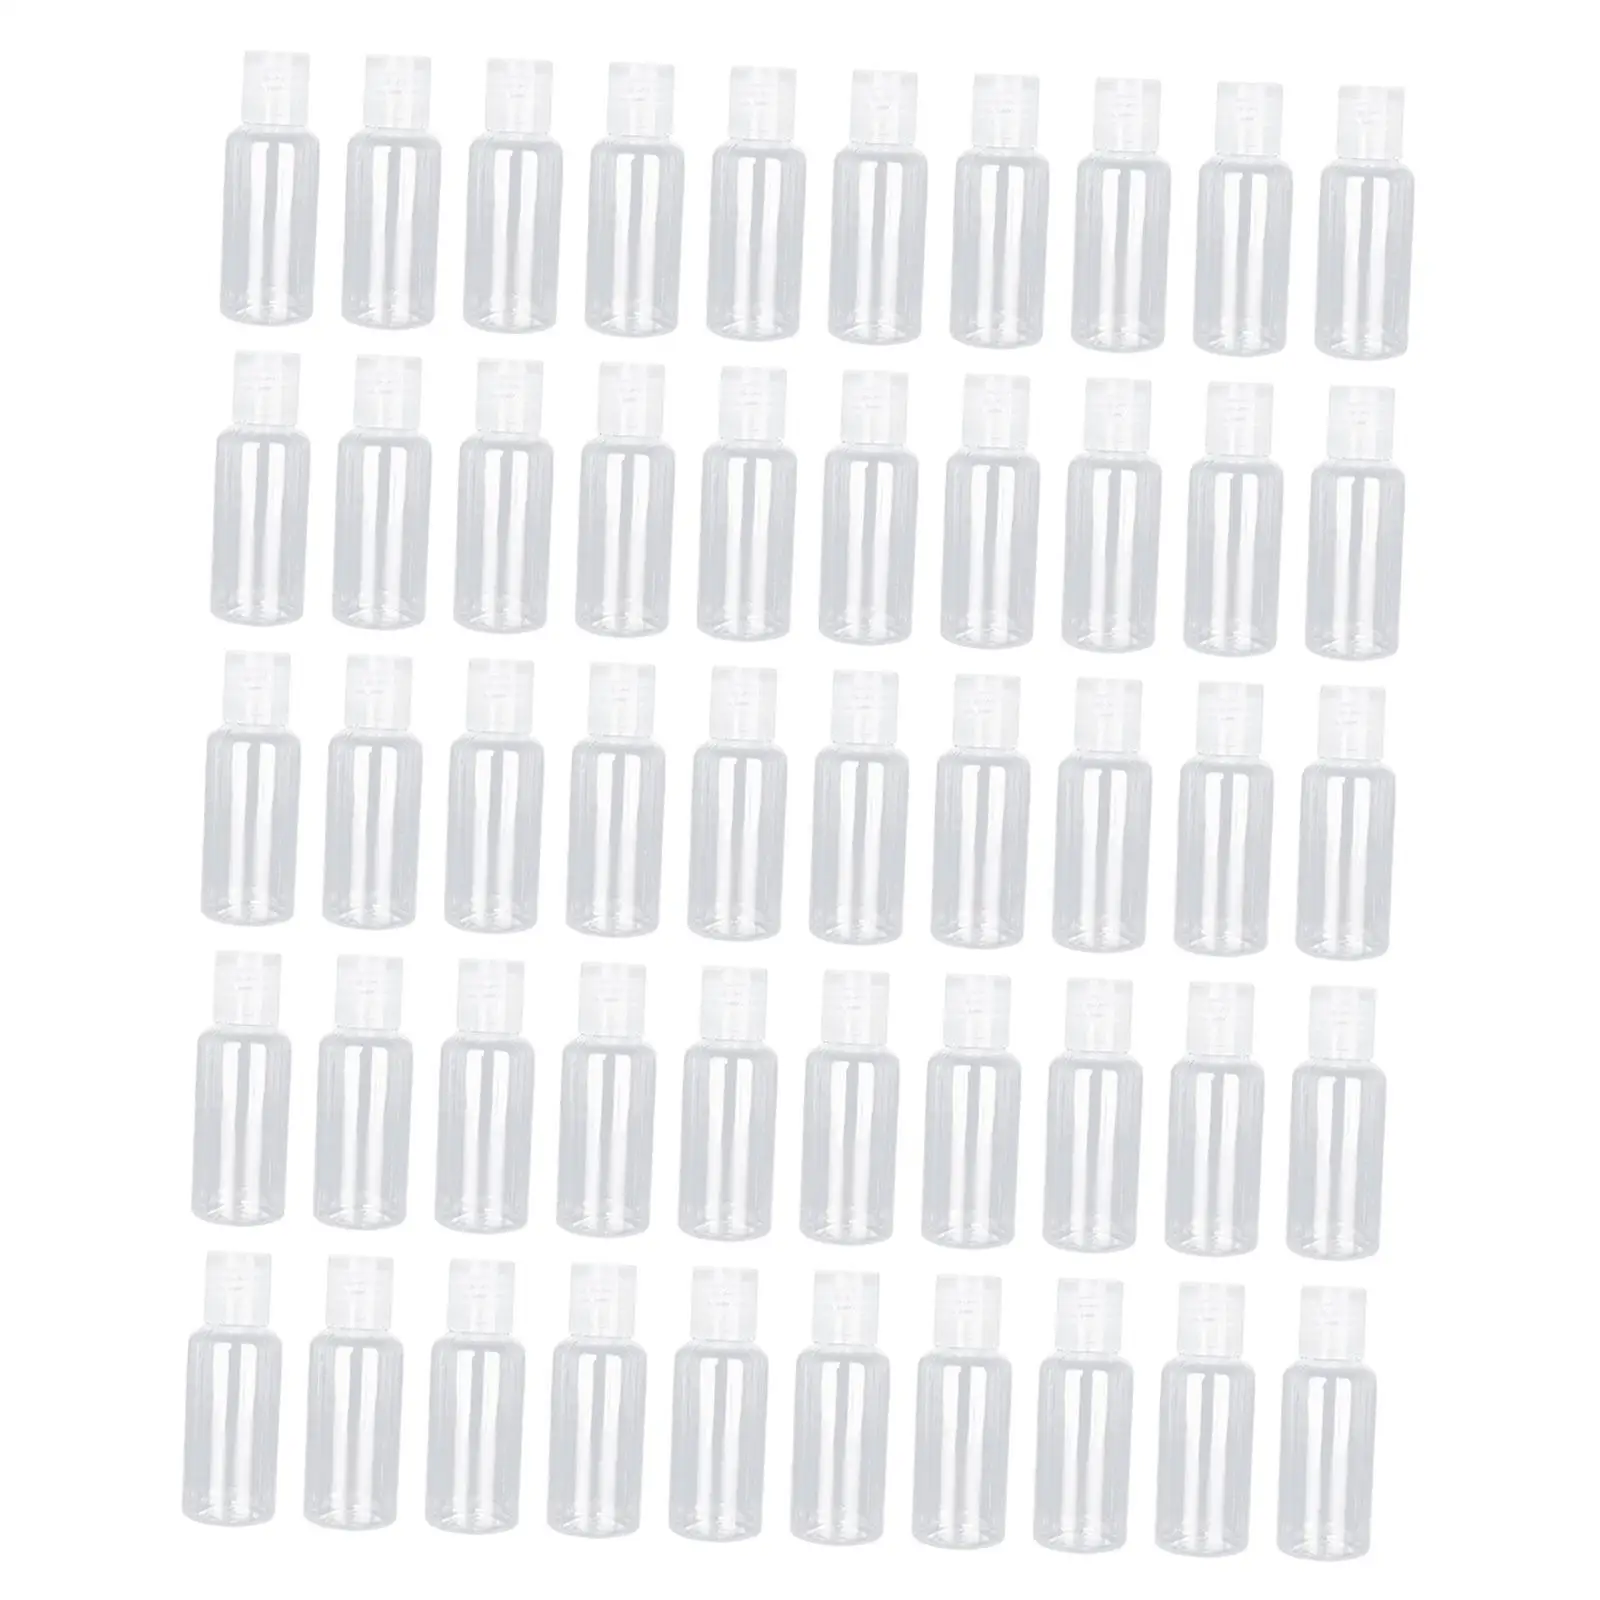 50x Cosmetic Bottle with Flip Caps Household Travel Size Refillable Bottles